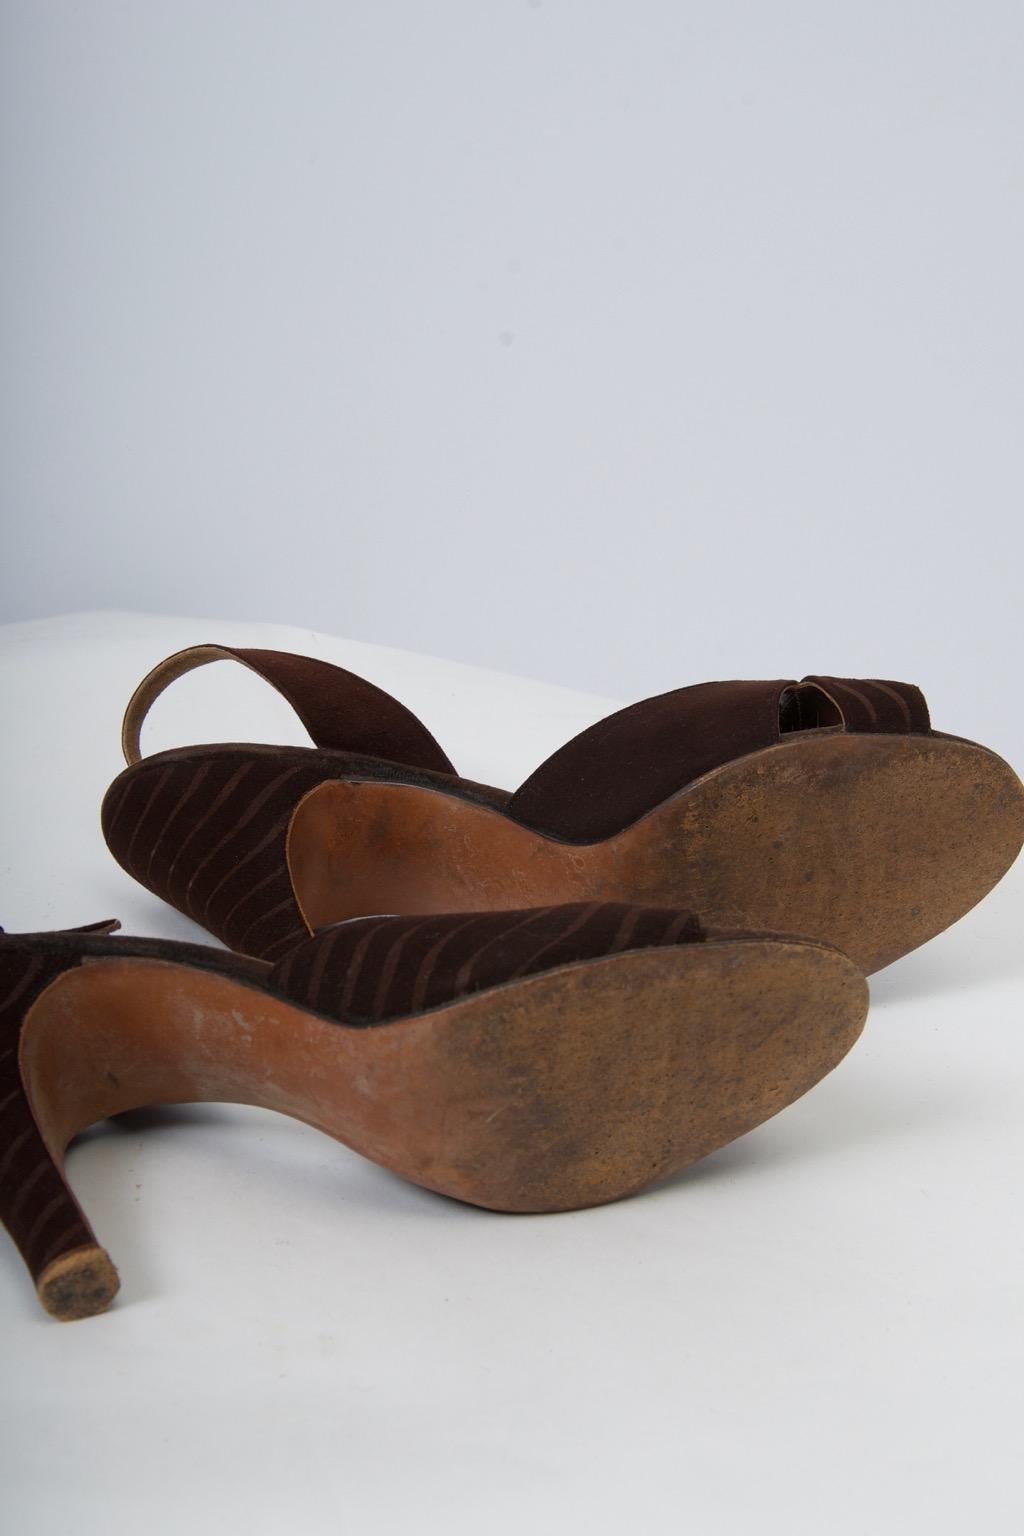 1950s Brown Suede Handbag and Shoes 4